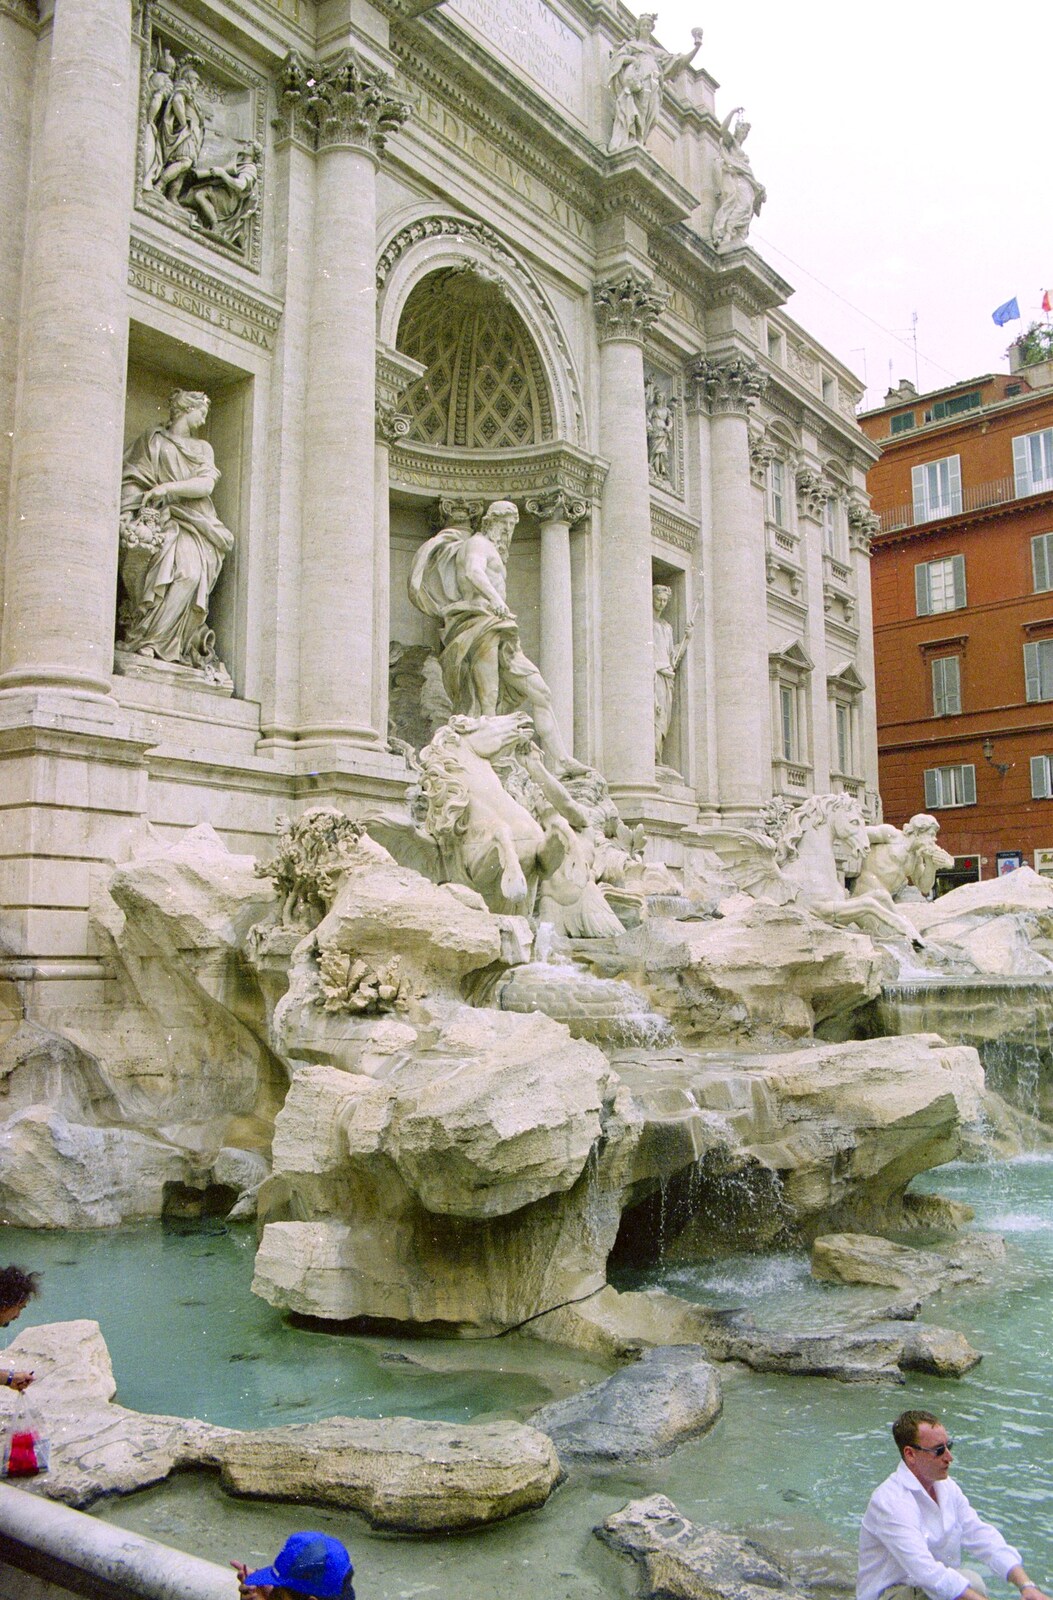 The Trevi Fountain from A Working Trip to Rome, Italy - 10th September 1999